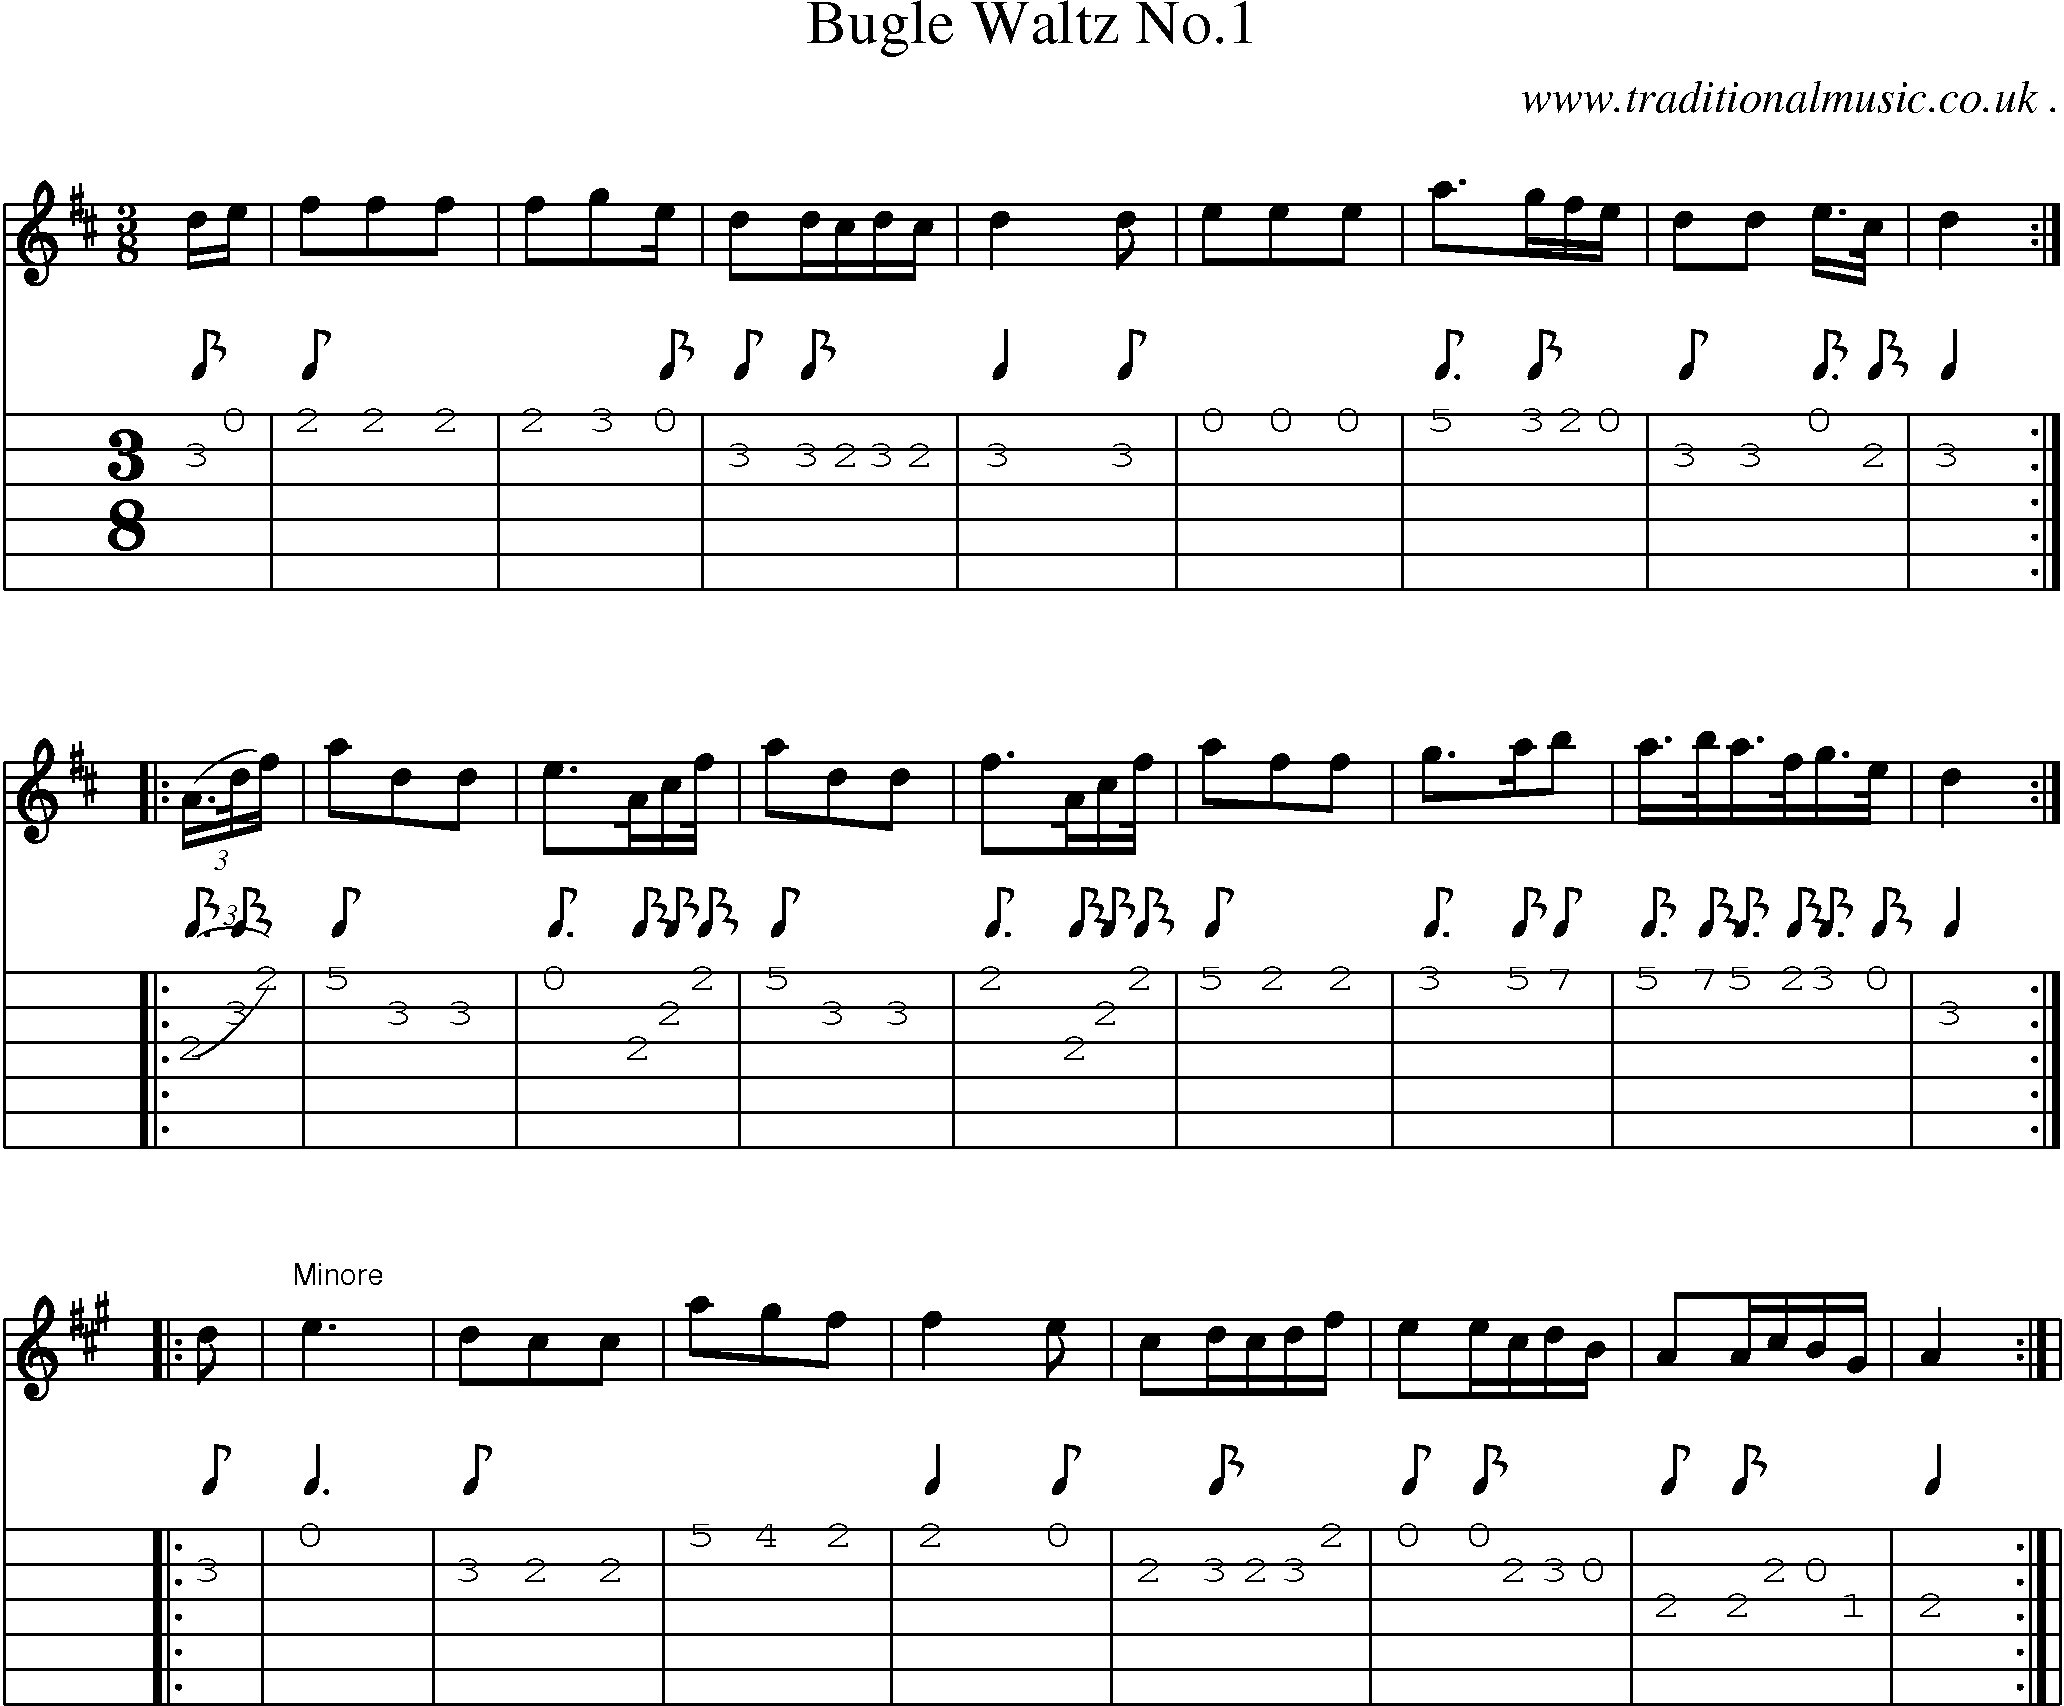 Sheet-Music and Guitar Tabs for Bugle Waltz No1